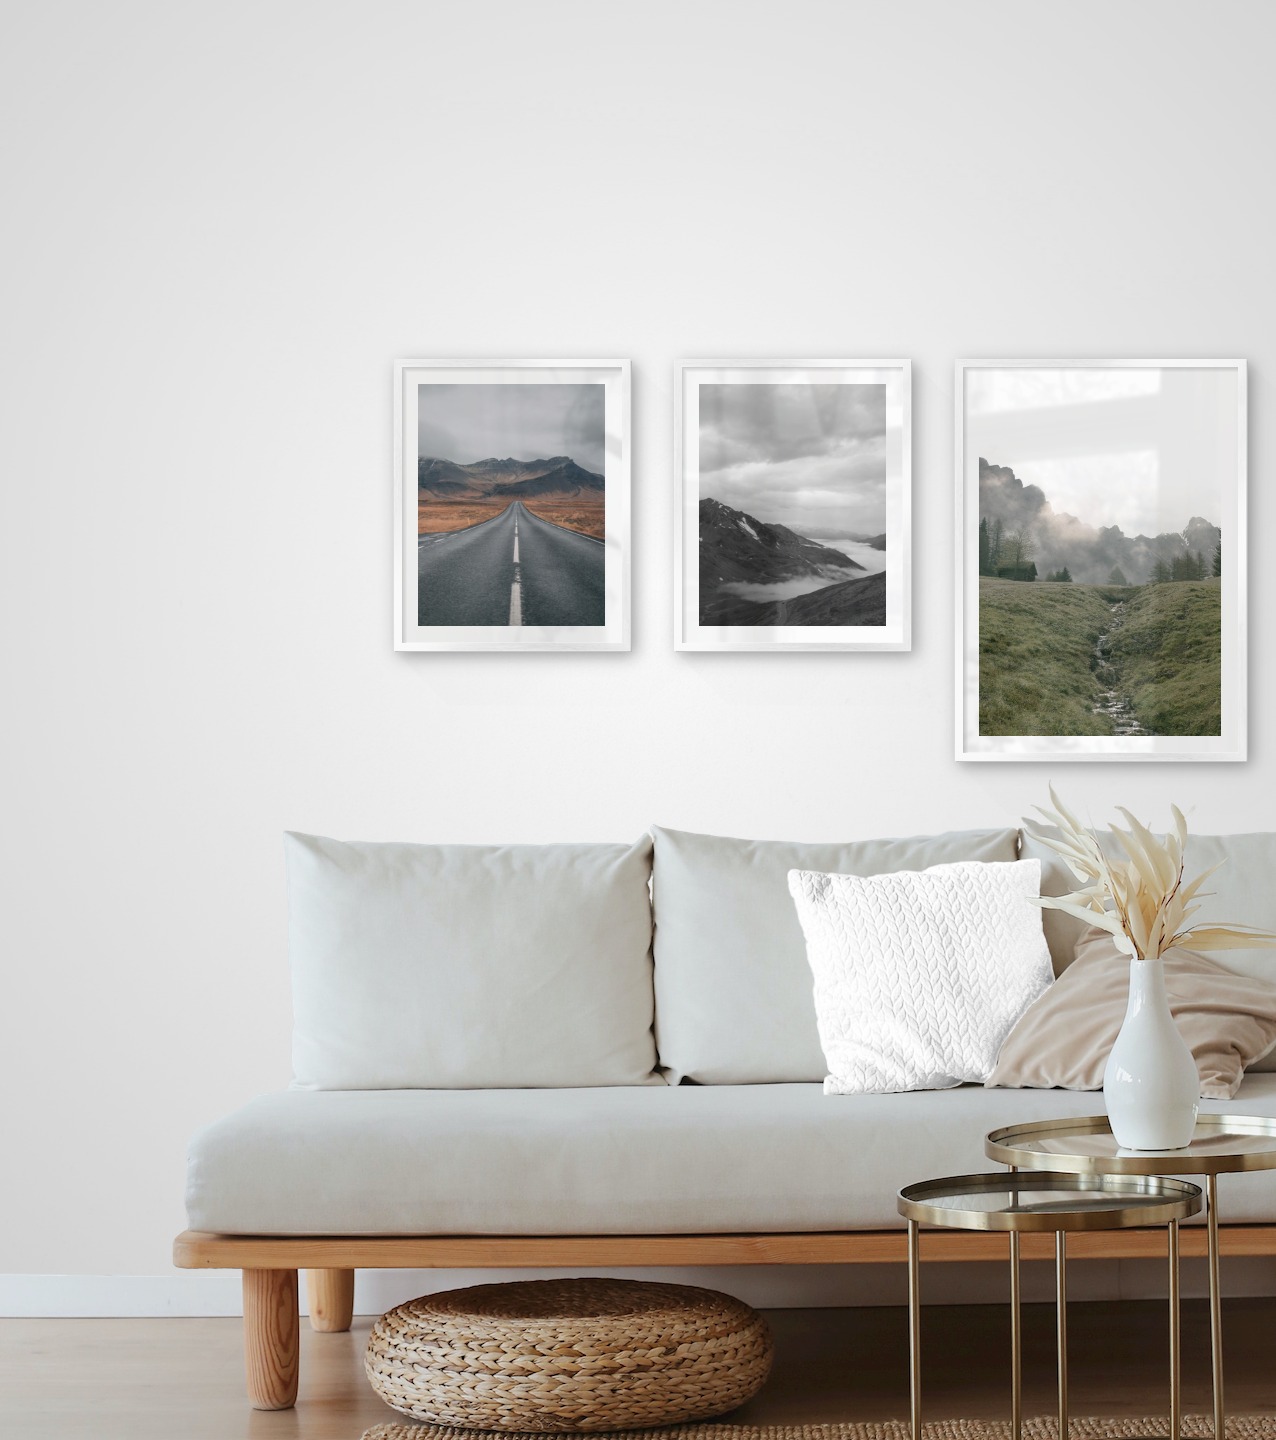 Gallery wall with picture frames in silver in sizes 40x50 and 50x70 with prints "Road and mountains", "Road among mountains" and "Green valley in front of mountains"